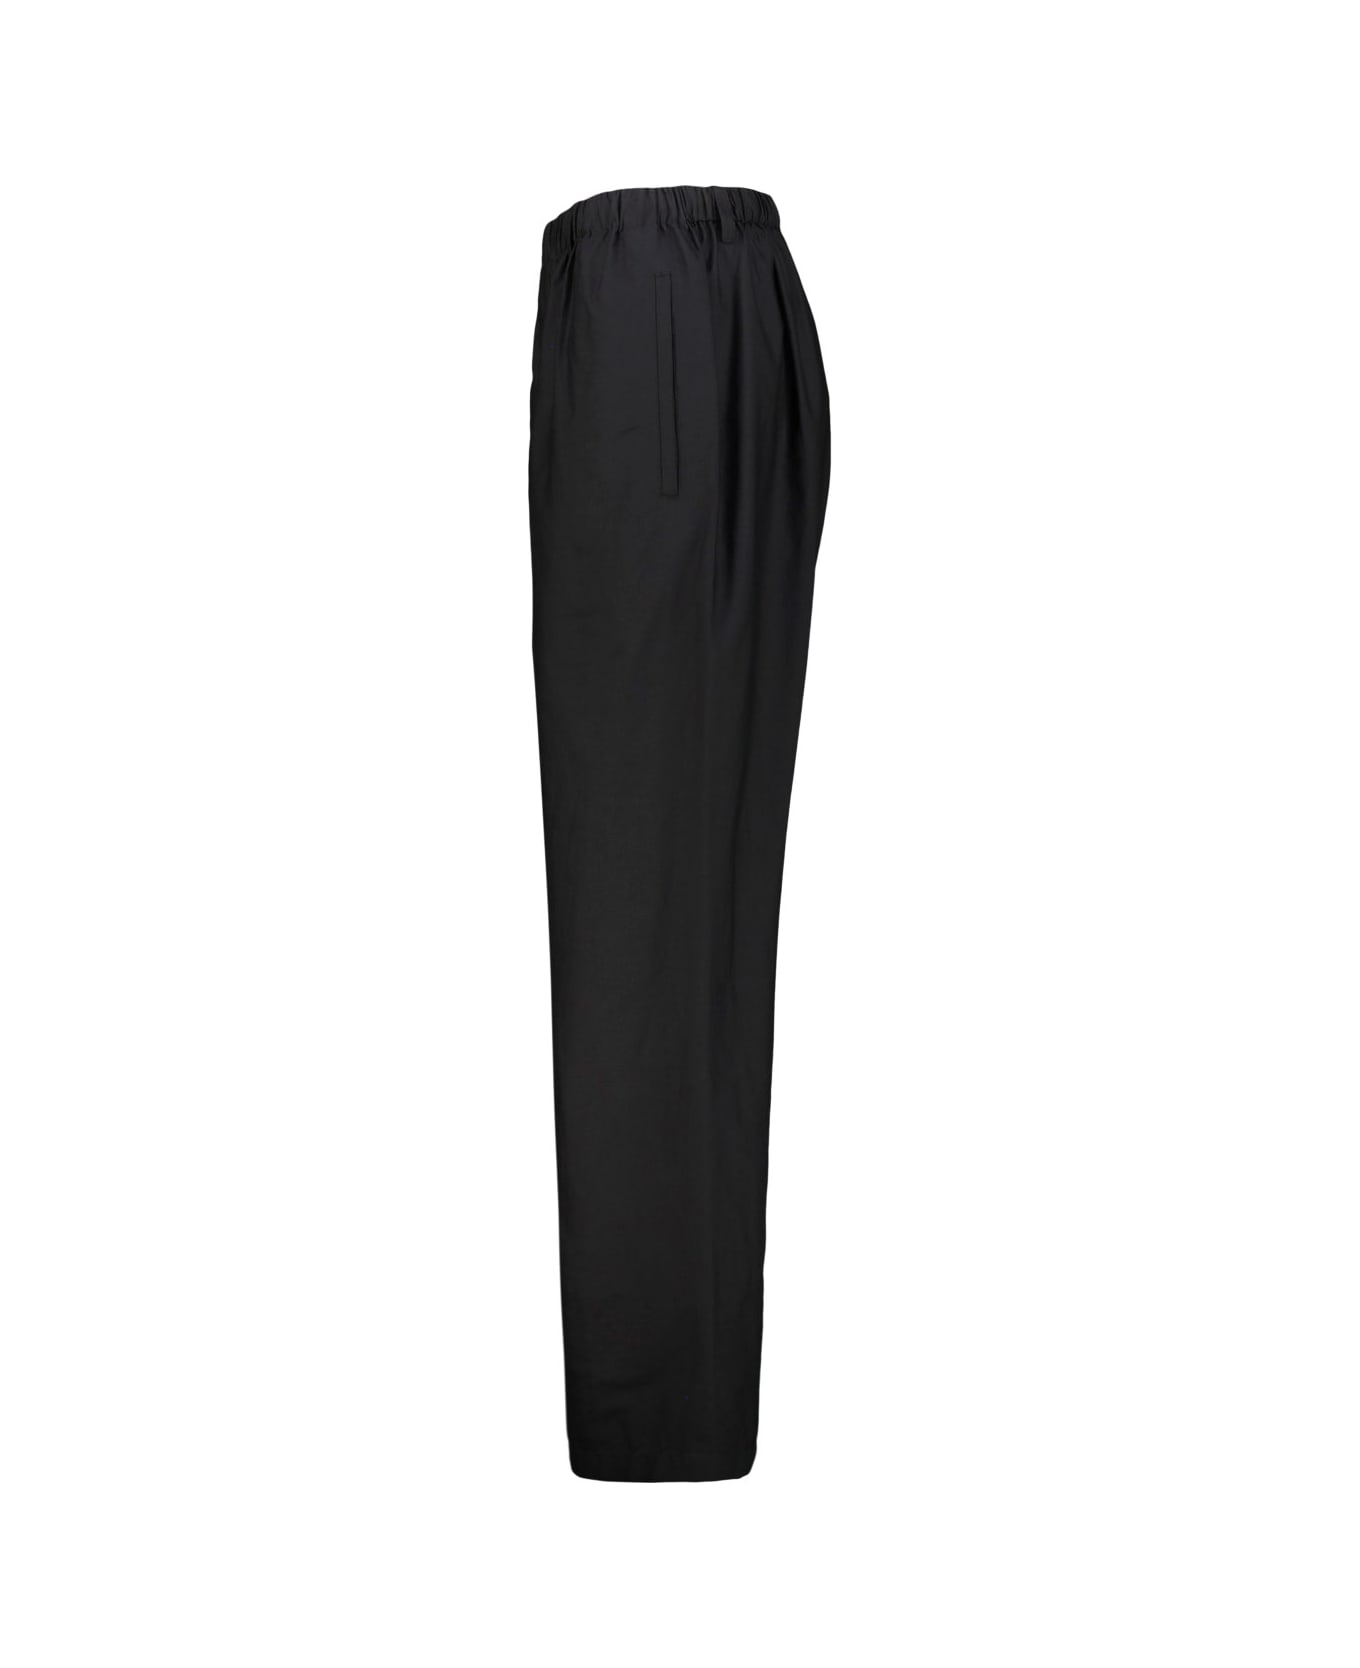 Lemaire Relaxed Pant - Black ボトムス